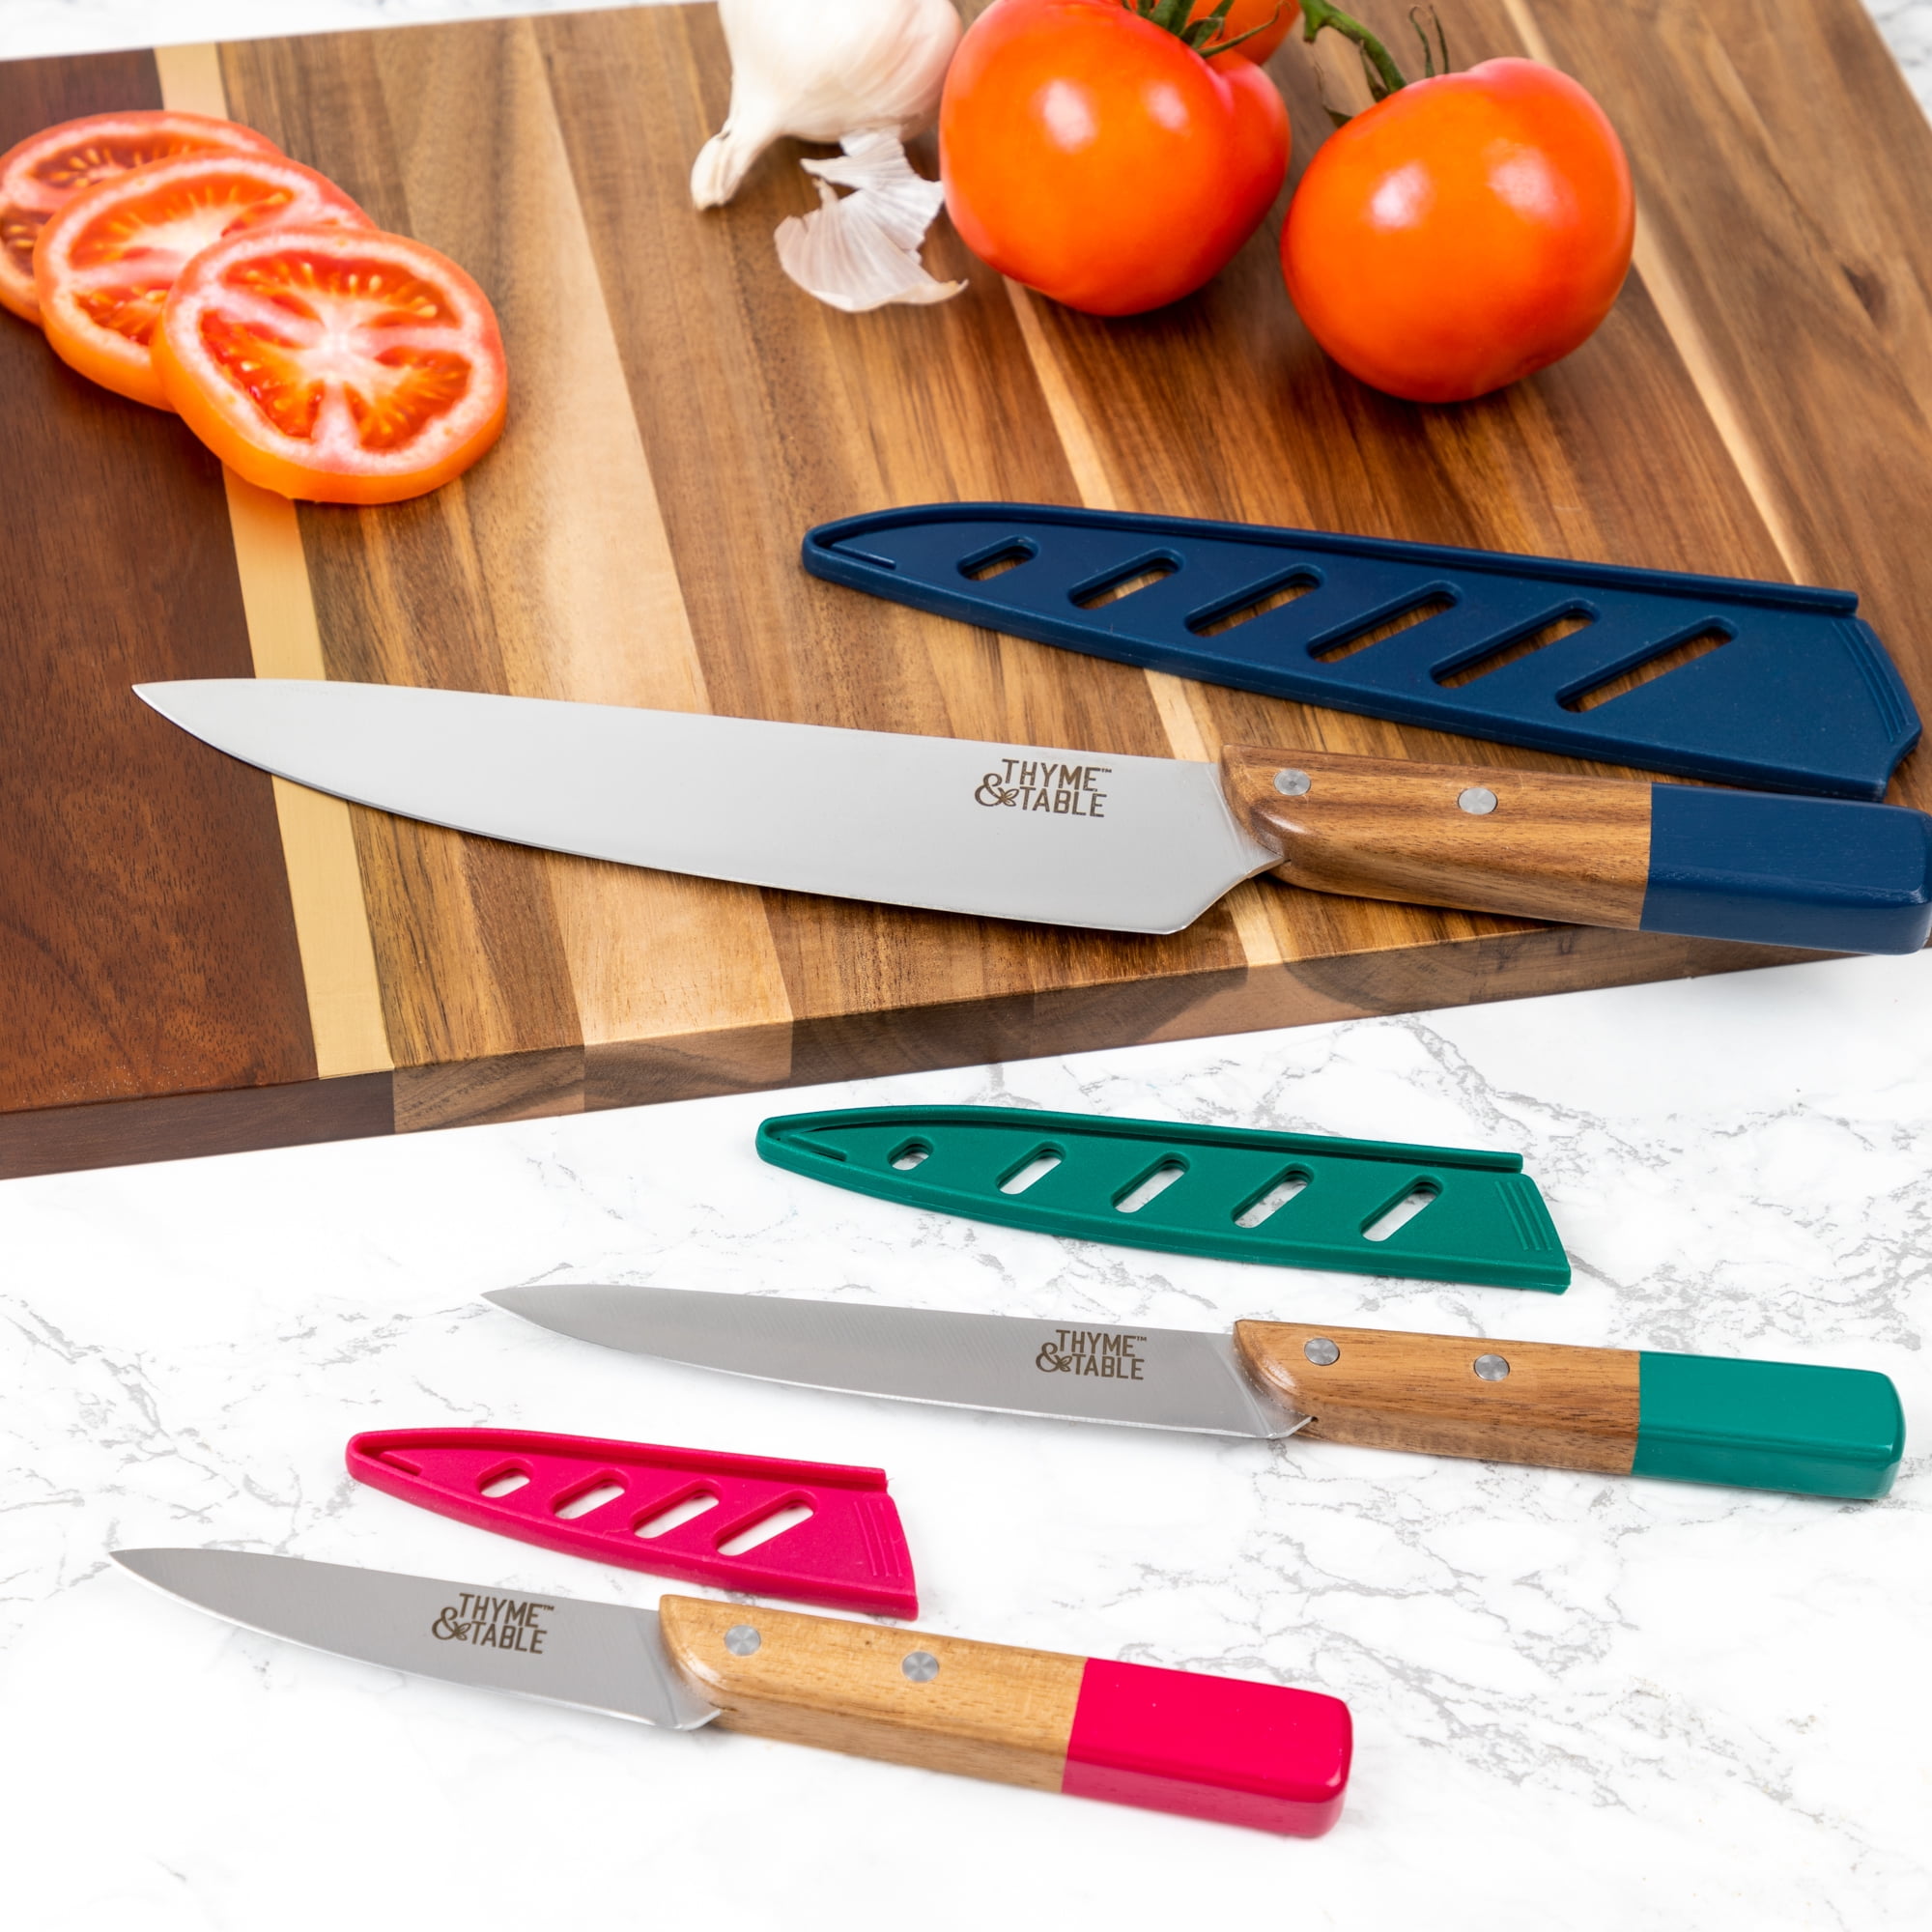 Thyme & Table 3pc Stainless Steel Kitchen Knife Set – SPICE GENERAL